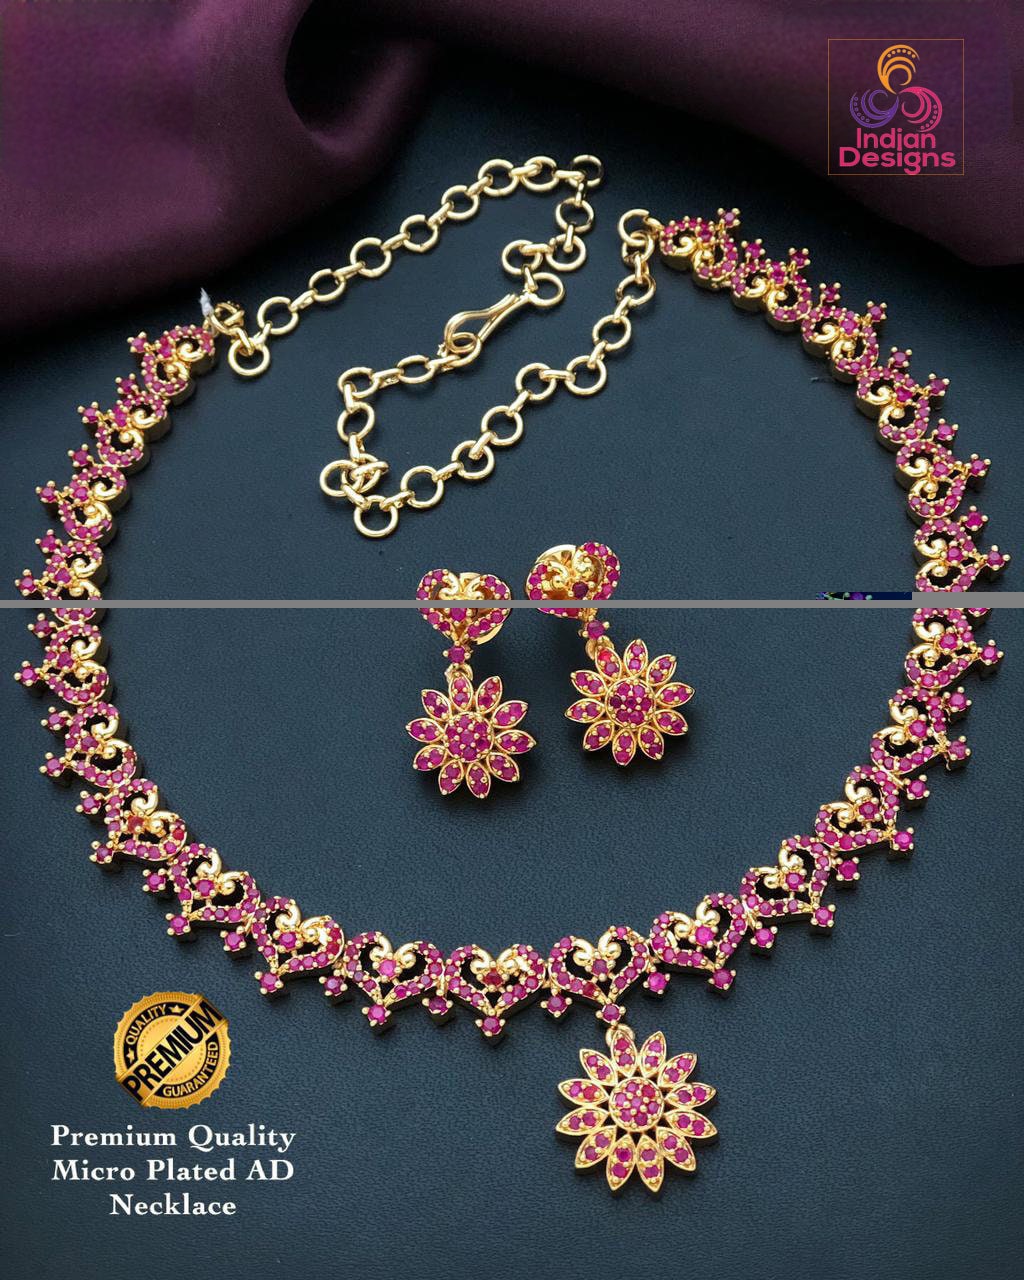 American Diamond Necklace-22k Gold polish | Emerald Ruby CZ Diamond choker | Indian jewelry sets | Ruby and Emerald necklace Floral designs